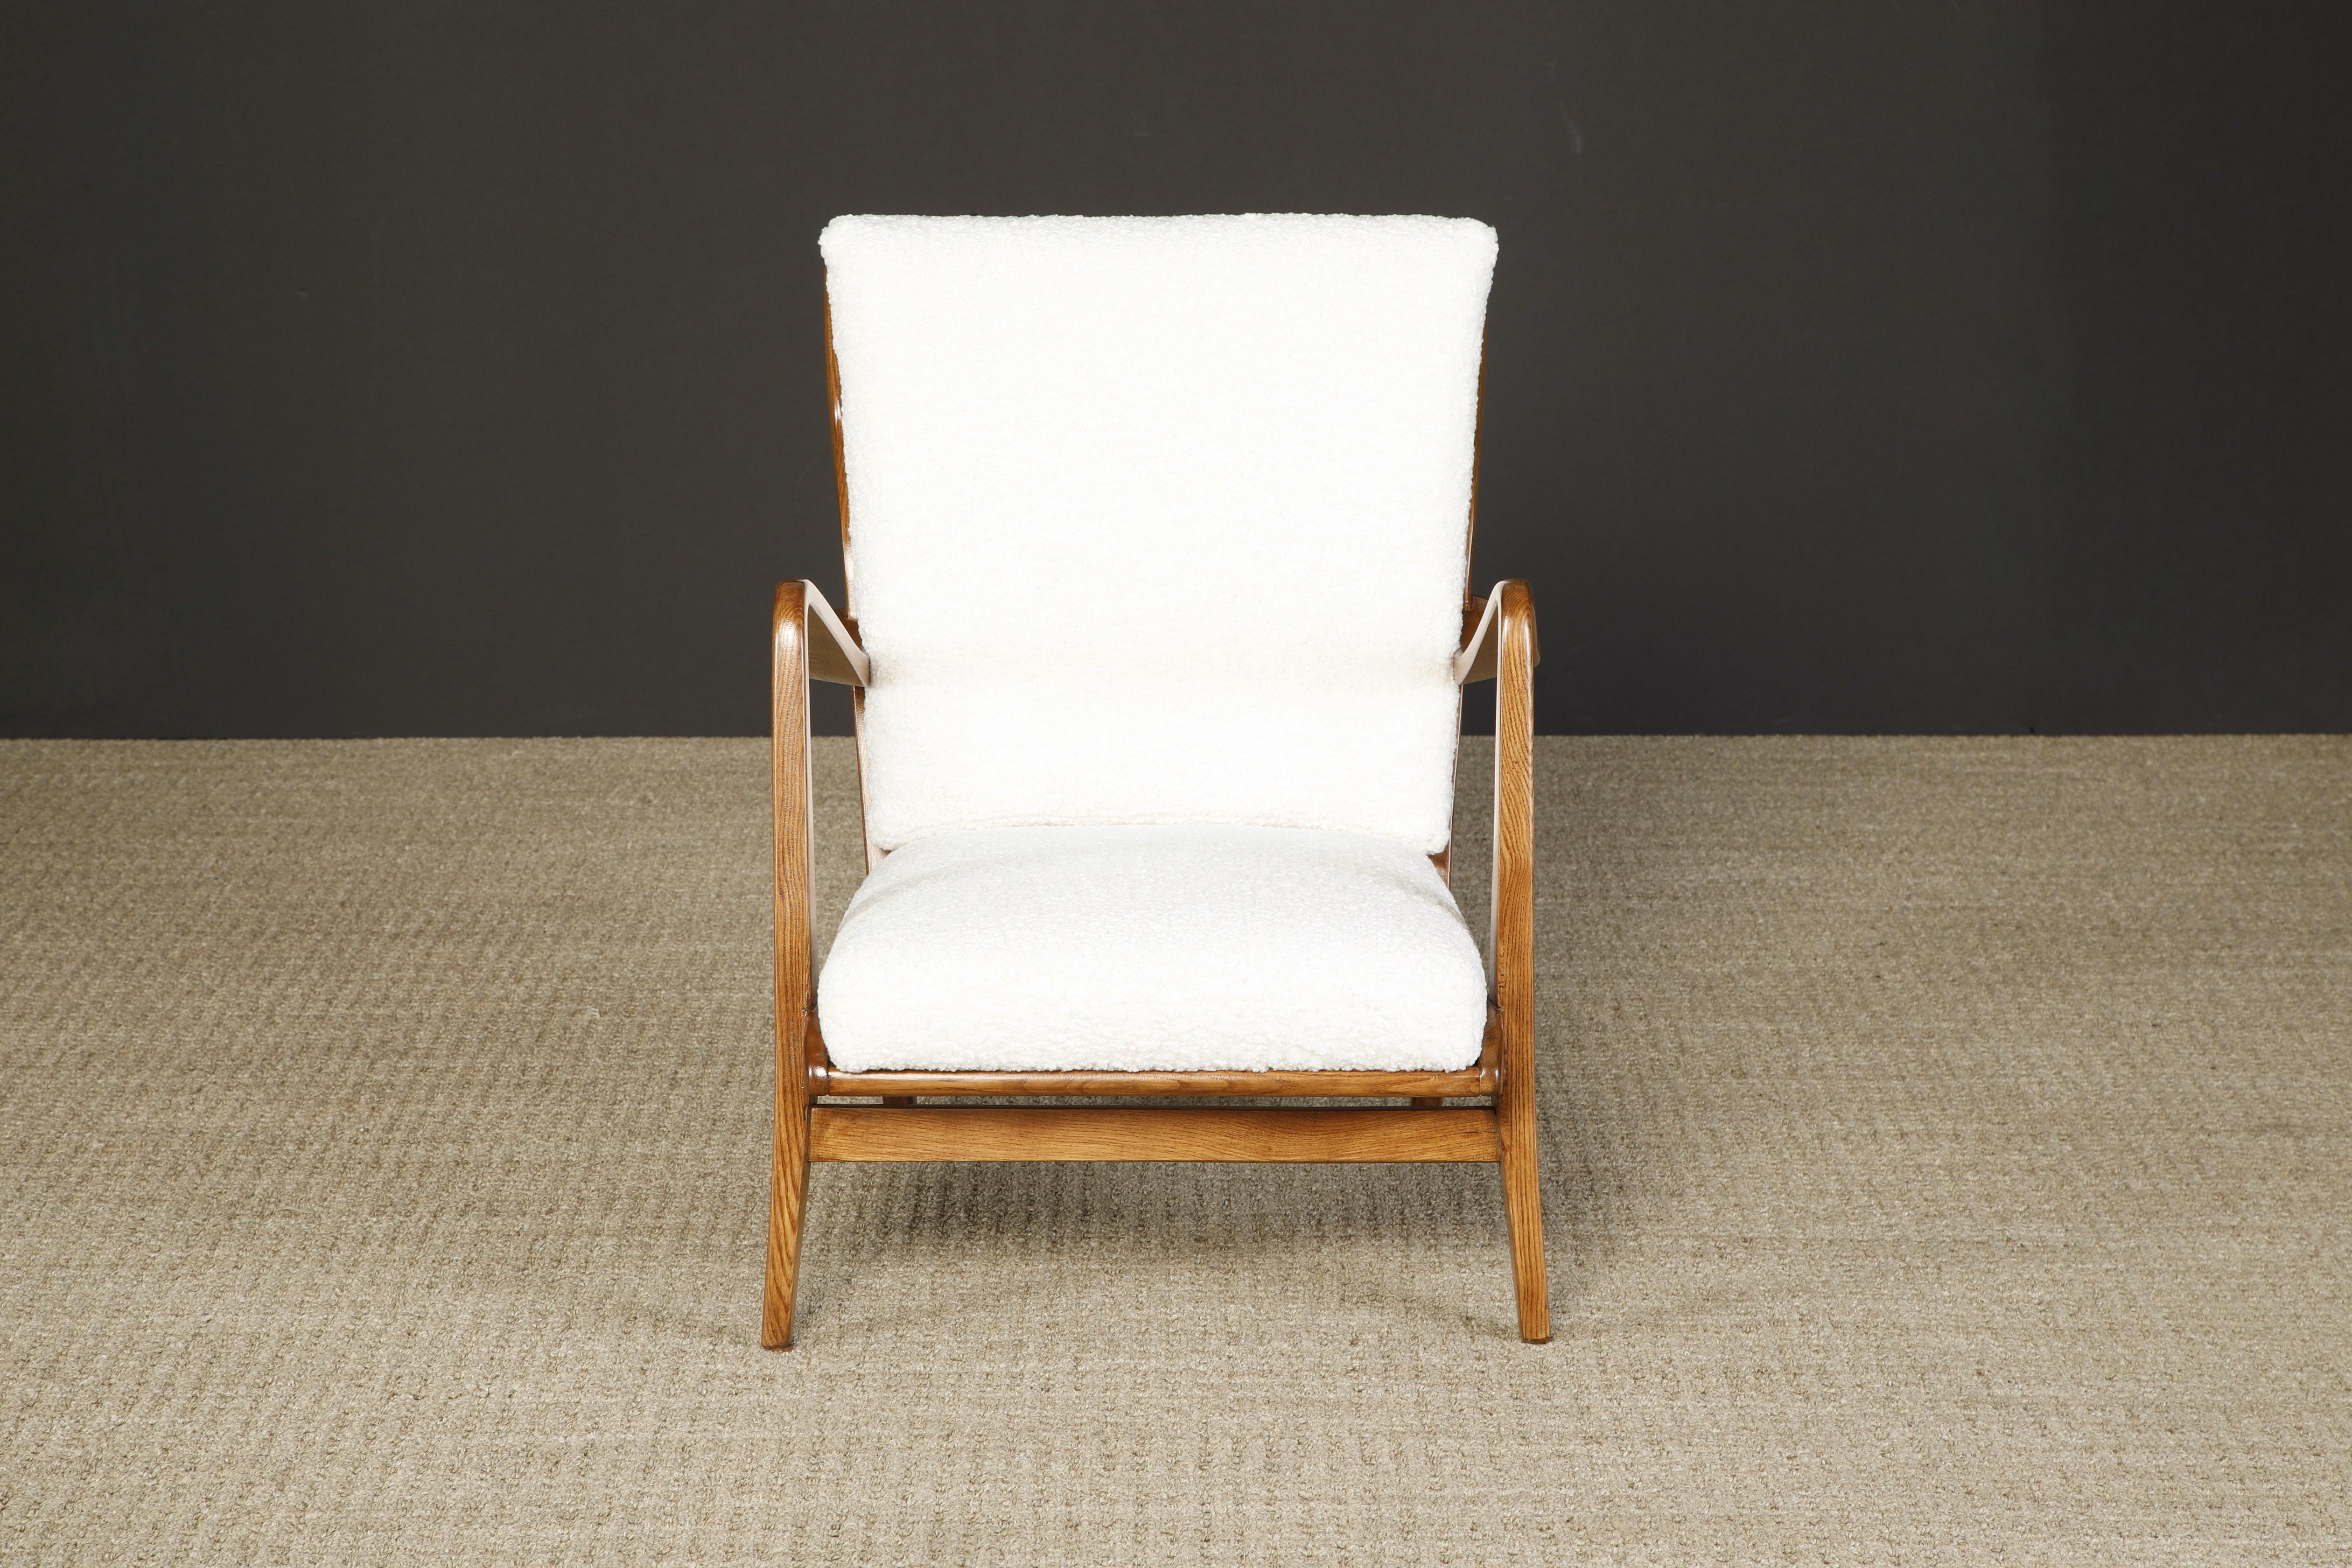 Bouclé Gio Ponti for Cassina Lounge Armchairs, Refinished & Reupholstered, Italy 1950s